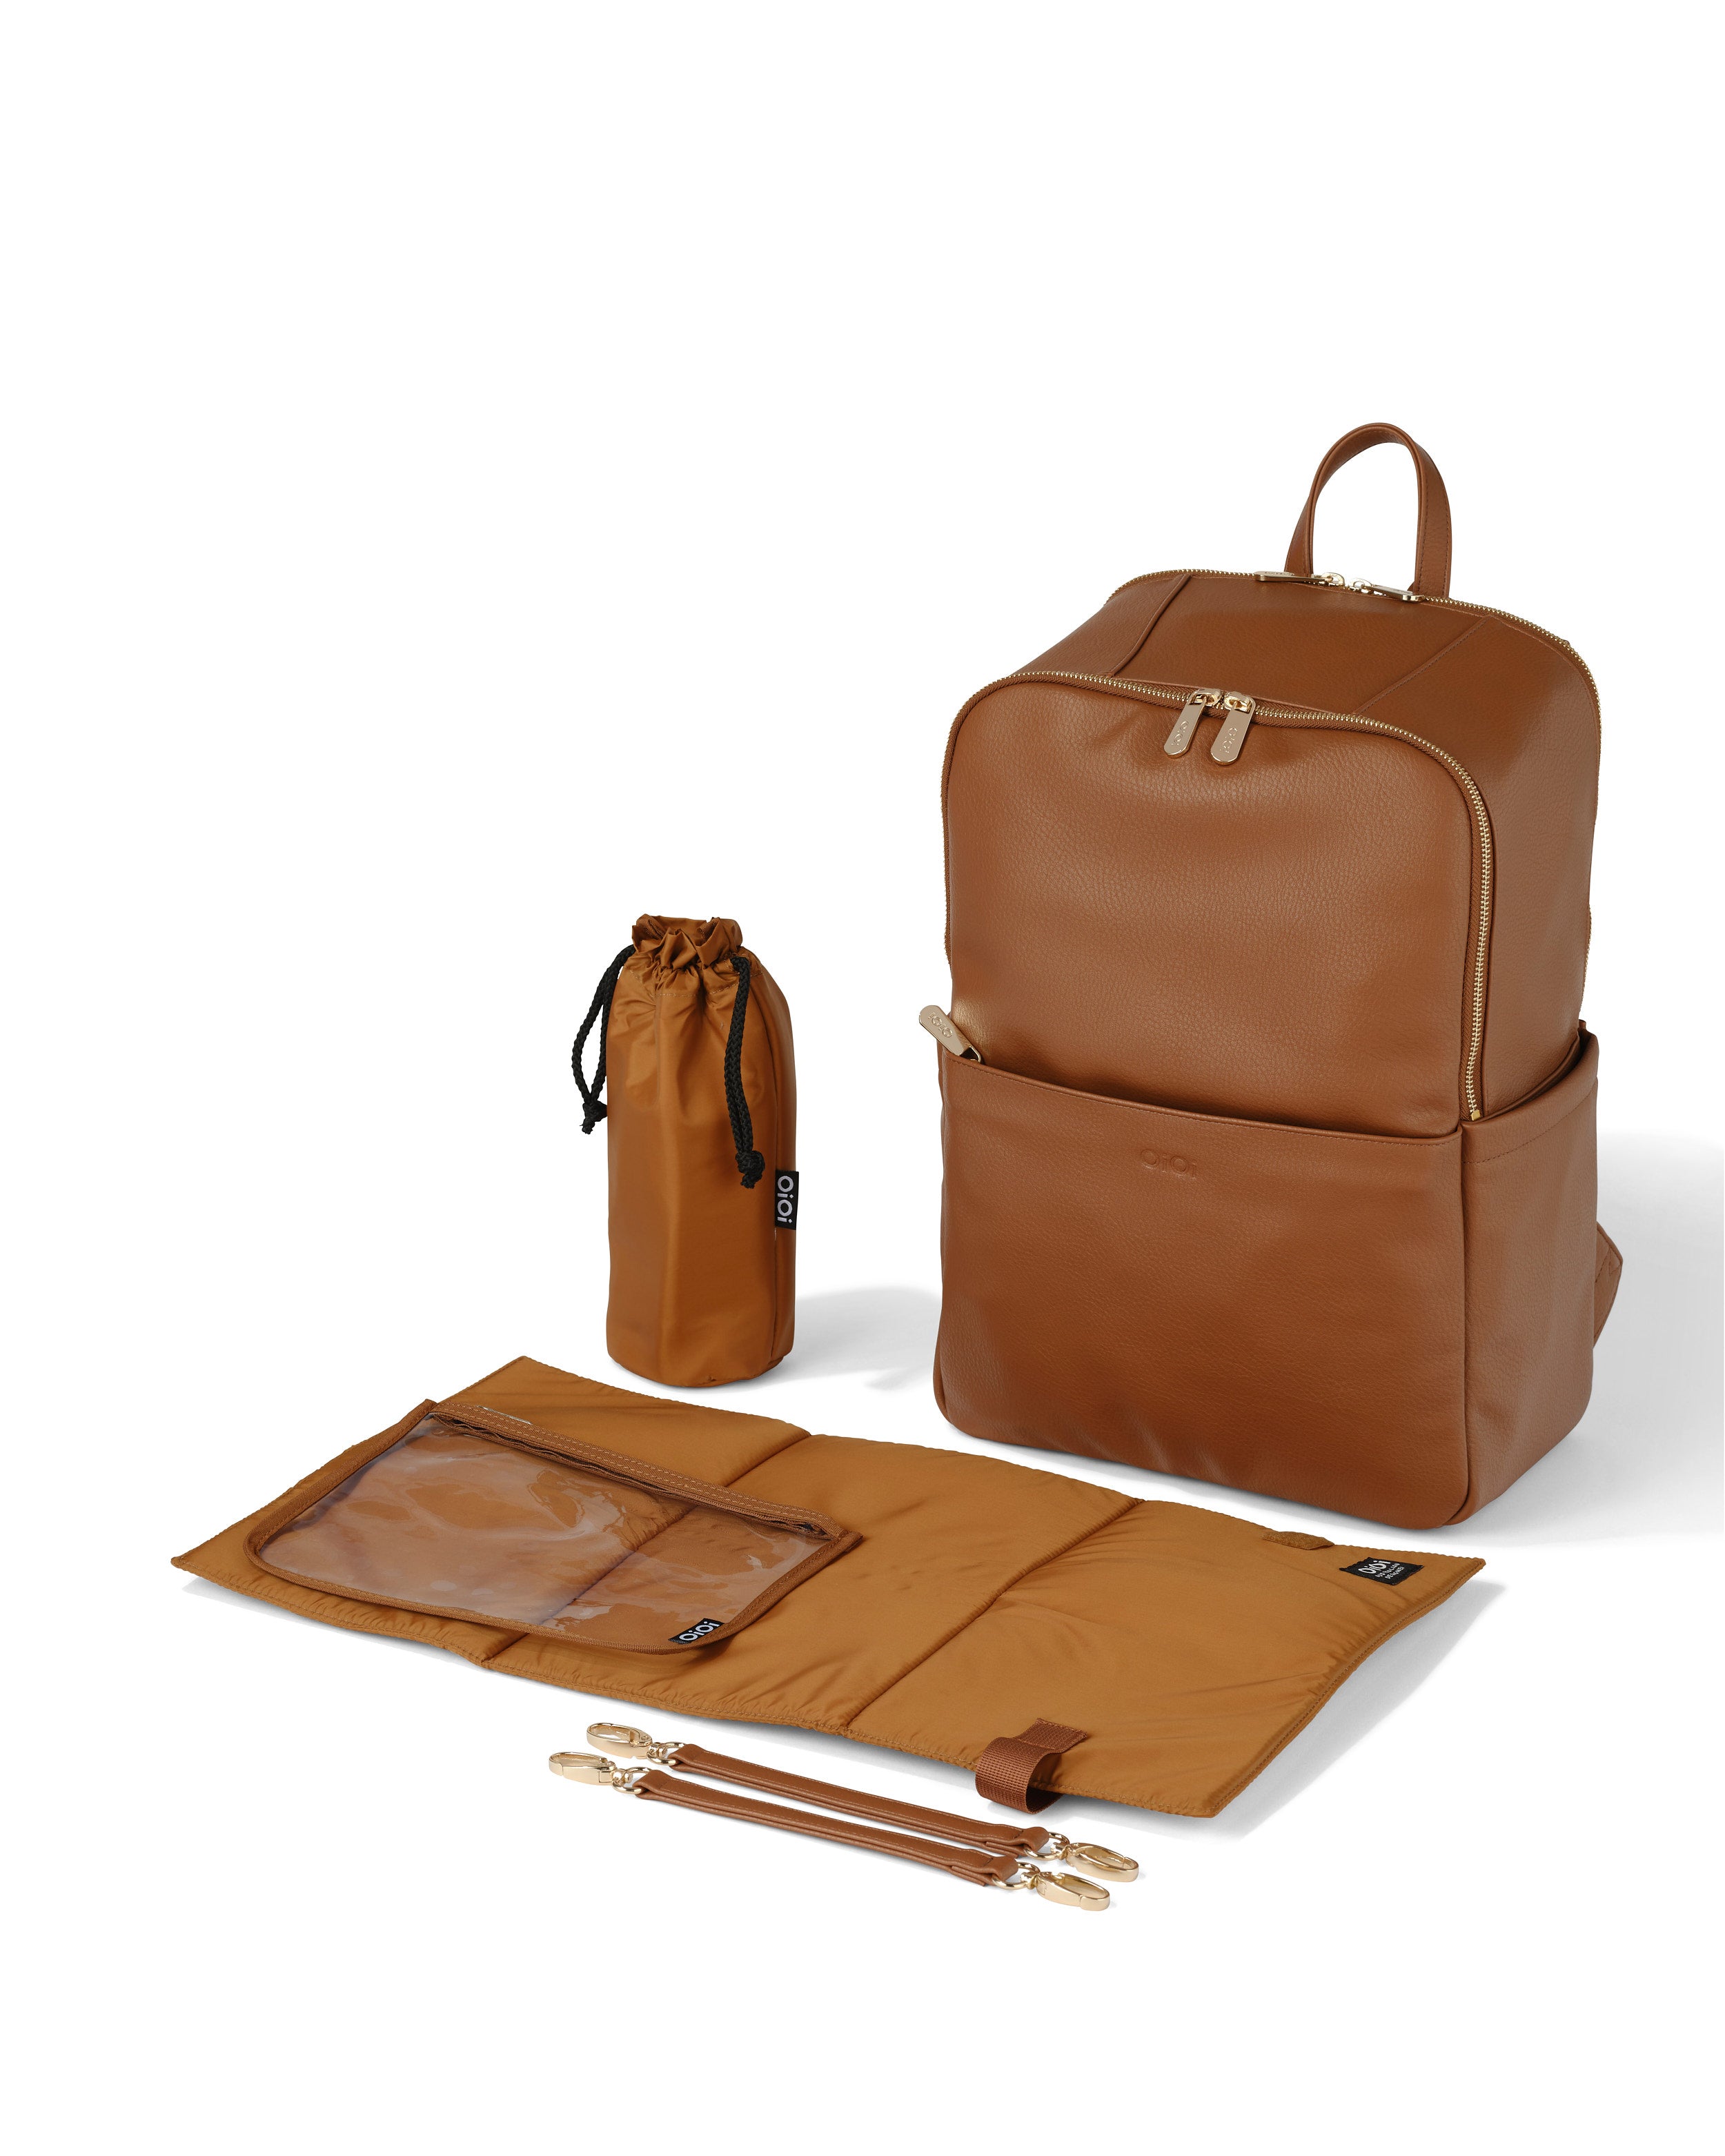 OiOi Multitasker Nappy Backpack Chestnut Faux Leather